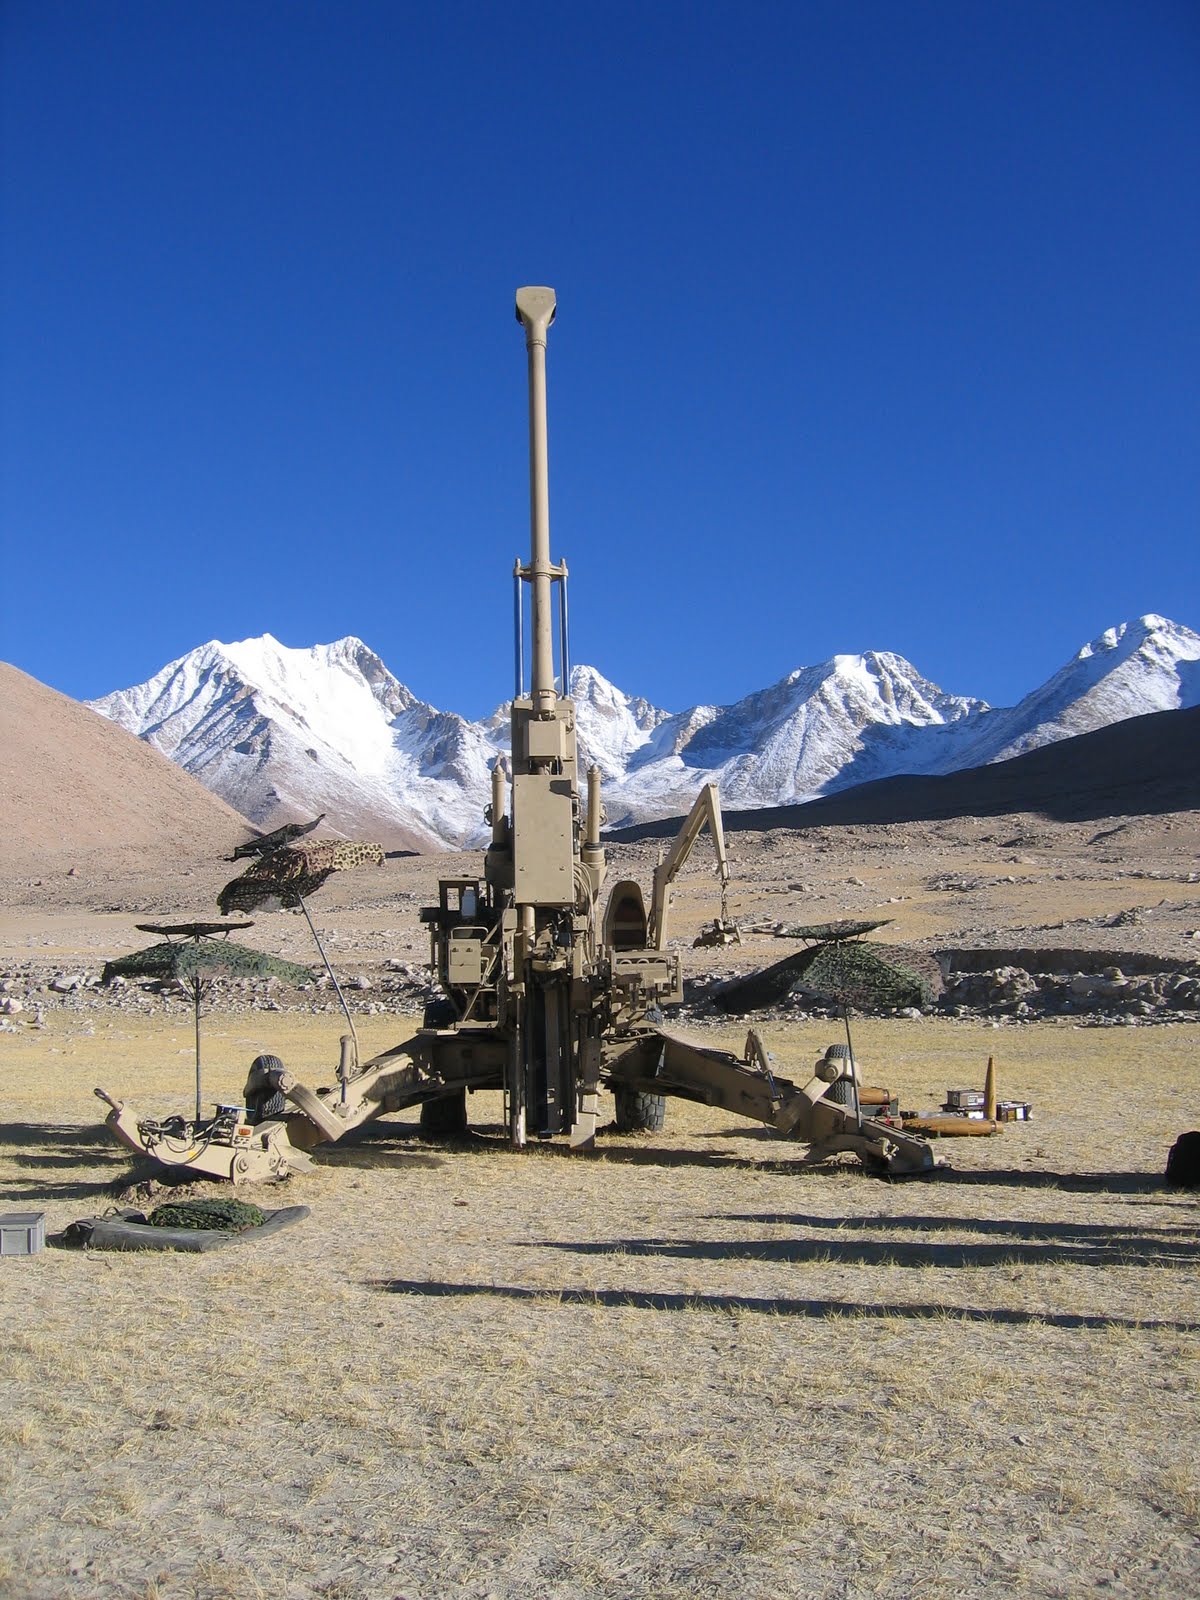  Bofor's 'FH77 B02' 155mm 52Caliber Towed Artillery Gun in trials in Ladhak, Kashmir. Indian Army has already descided to buy the M777A2 155mm 52Caliber, Ultra Light version of this Howitzer, for its mountain divisions ! This 'FH77 B02', field artillery-gun, is the prefered choice of the Army & has already won the tender but due to government bureaucracy, the deal has been stalled.